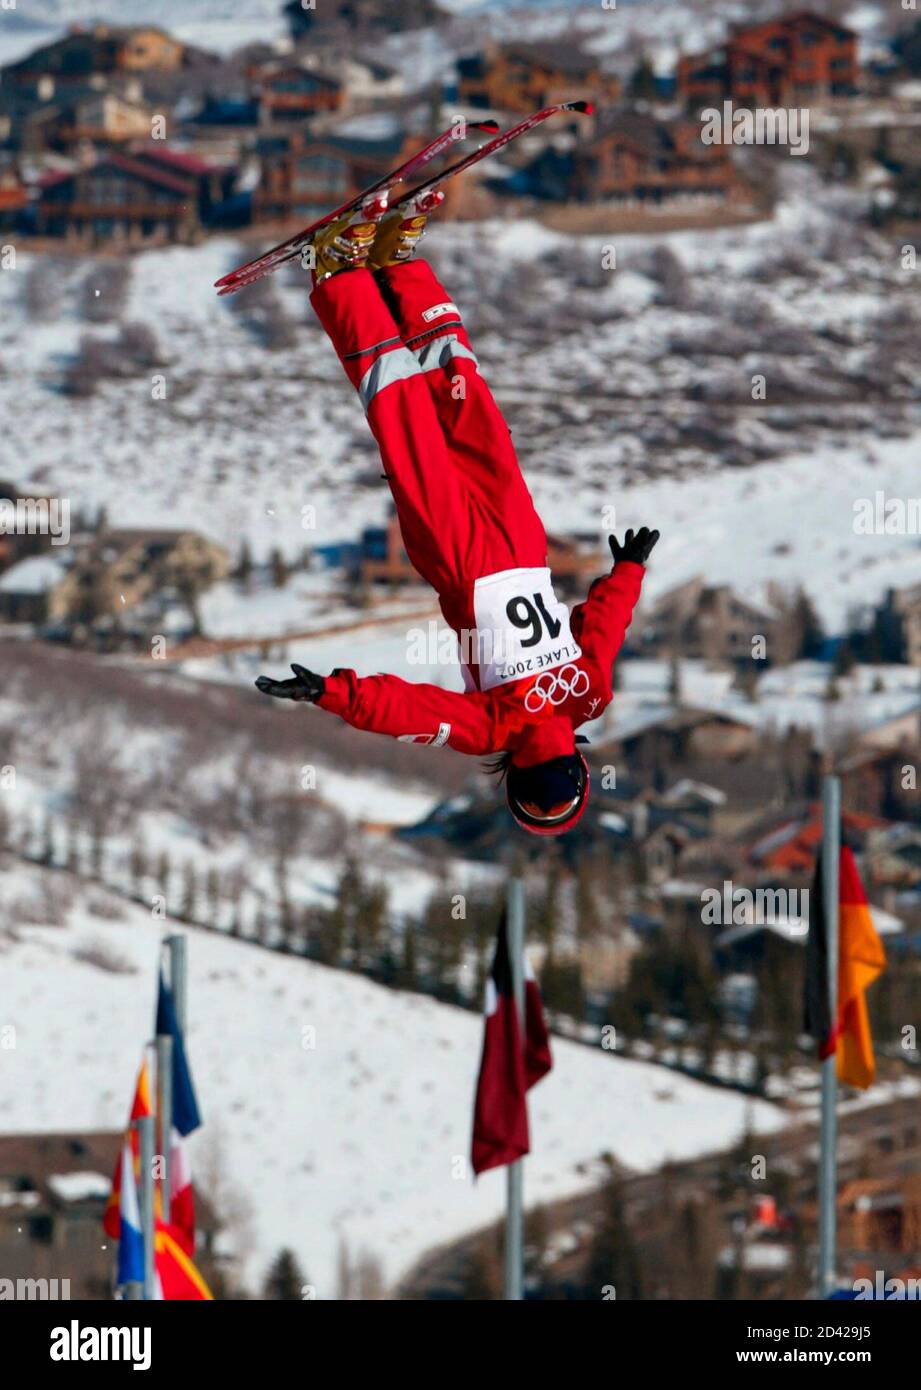 Nina Li of China twists through her jump during the qualifying round in  women's freestyle skiing aerials at the Salt Lake 2002 Olympic Winter Games  in Deer Valley, February 16, 2002. The